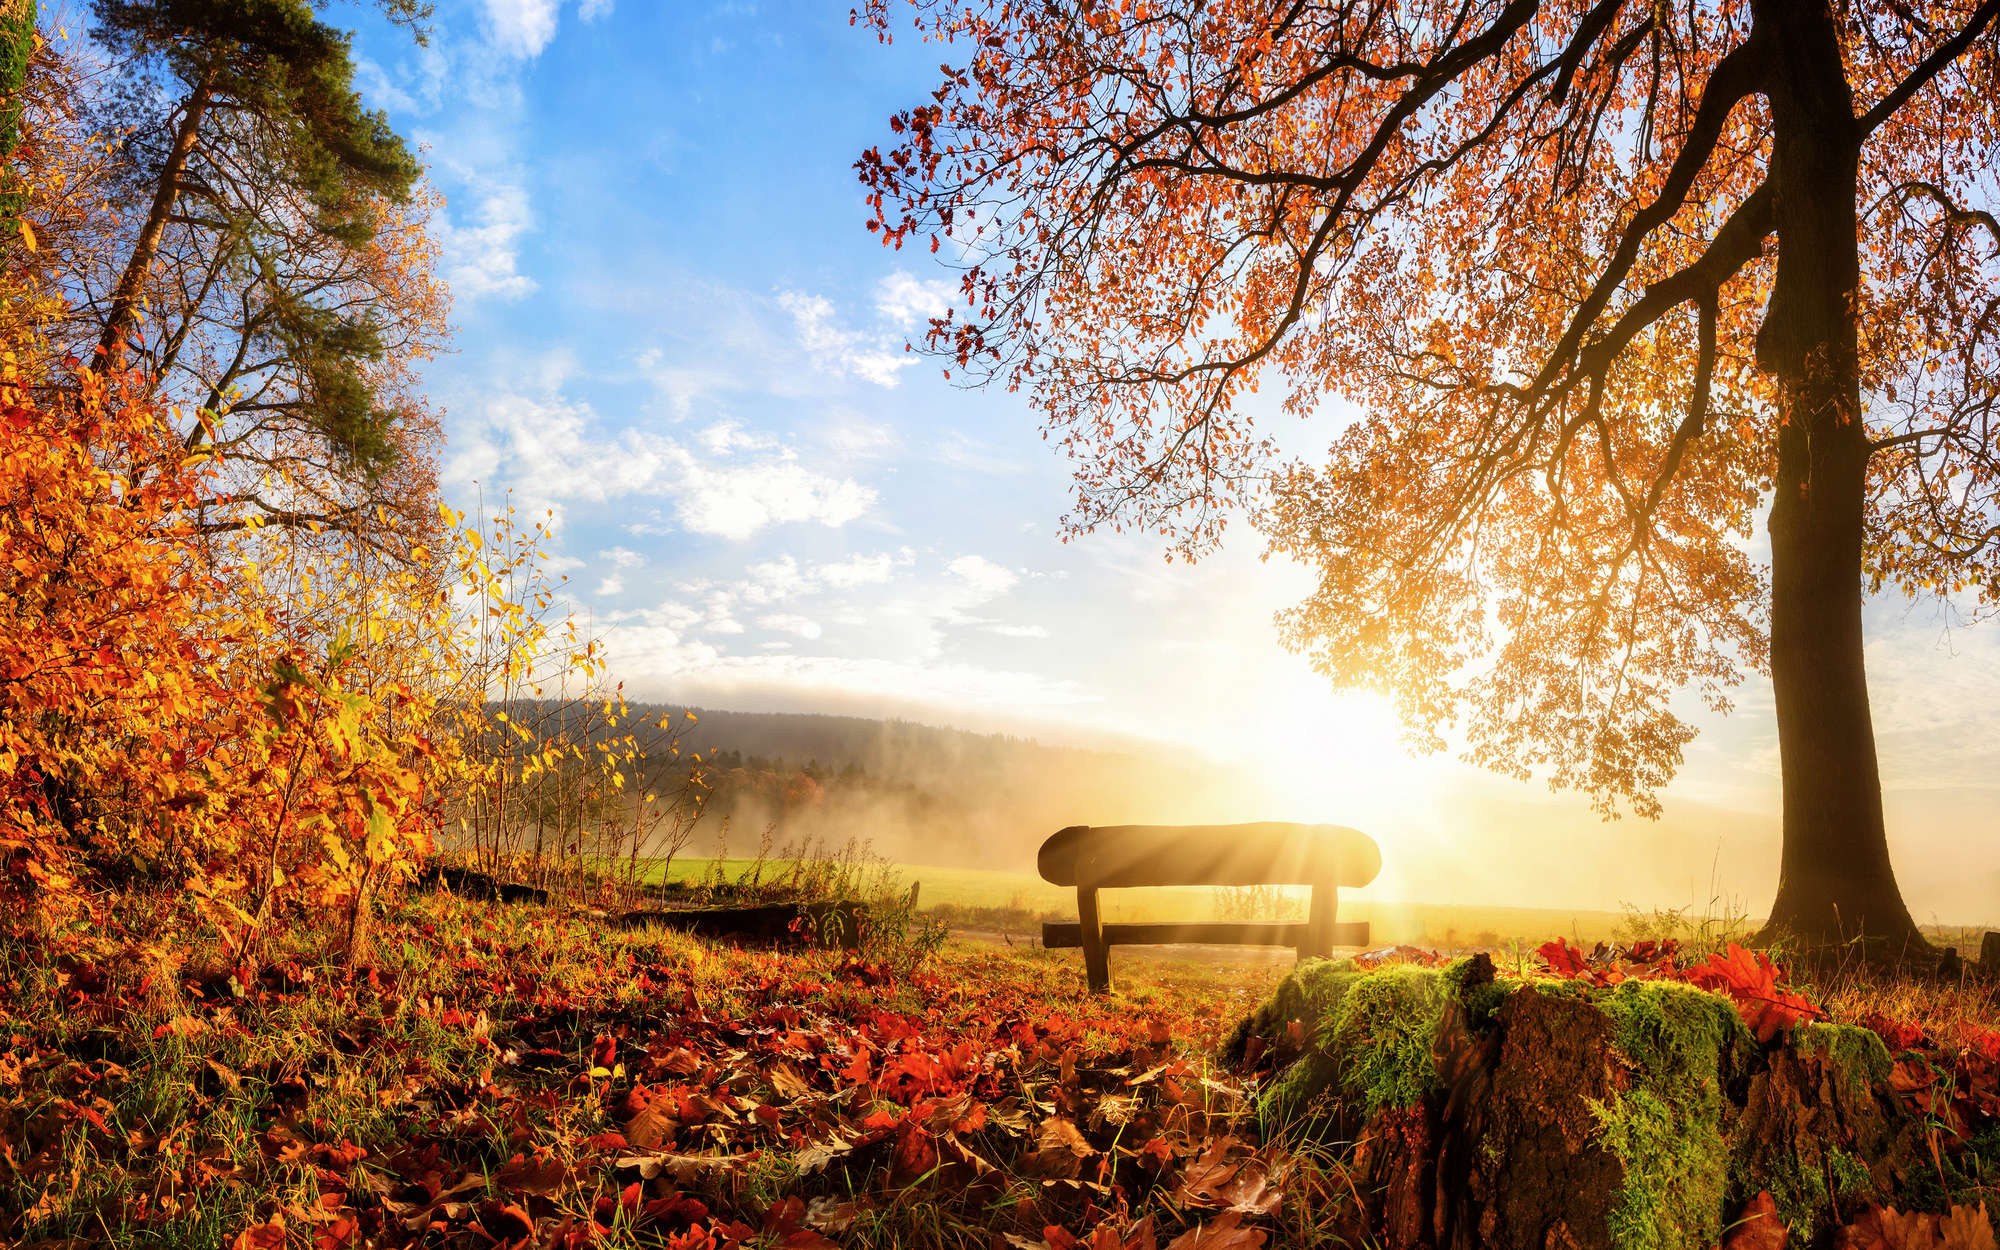             Photo wallpaper Bench in the Forest on an Autumn Morning - Premium Smooth Non-woven
        